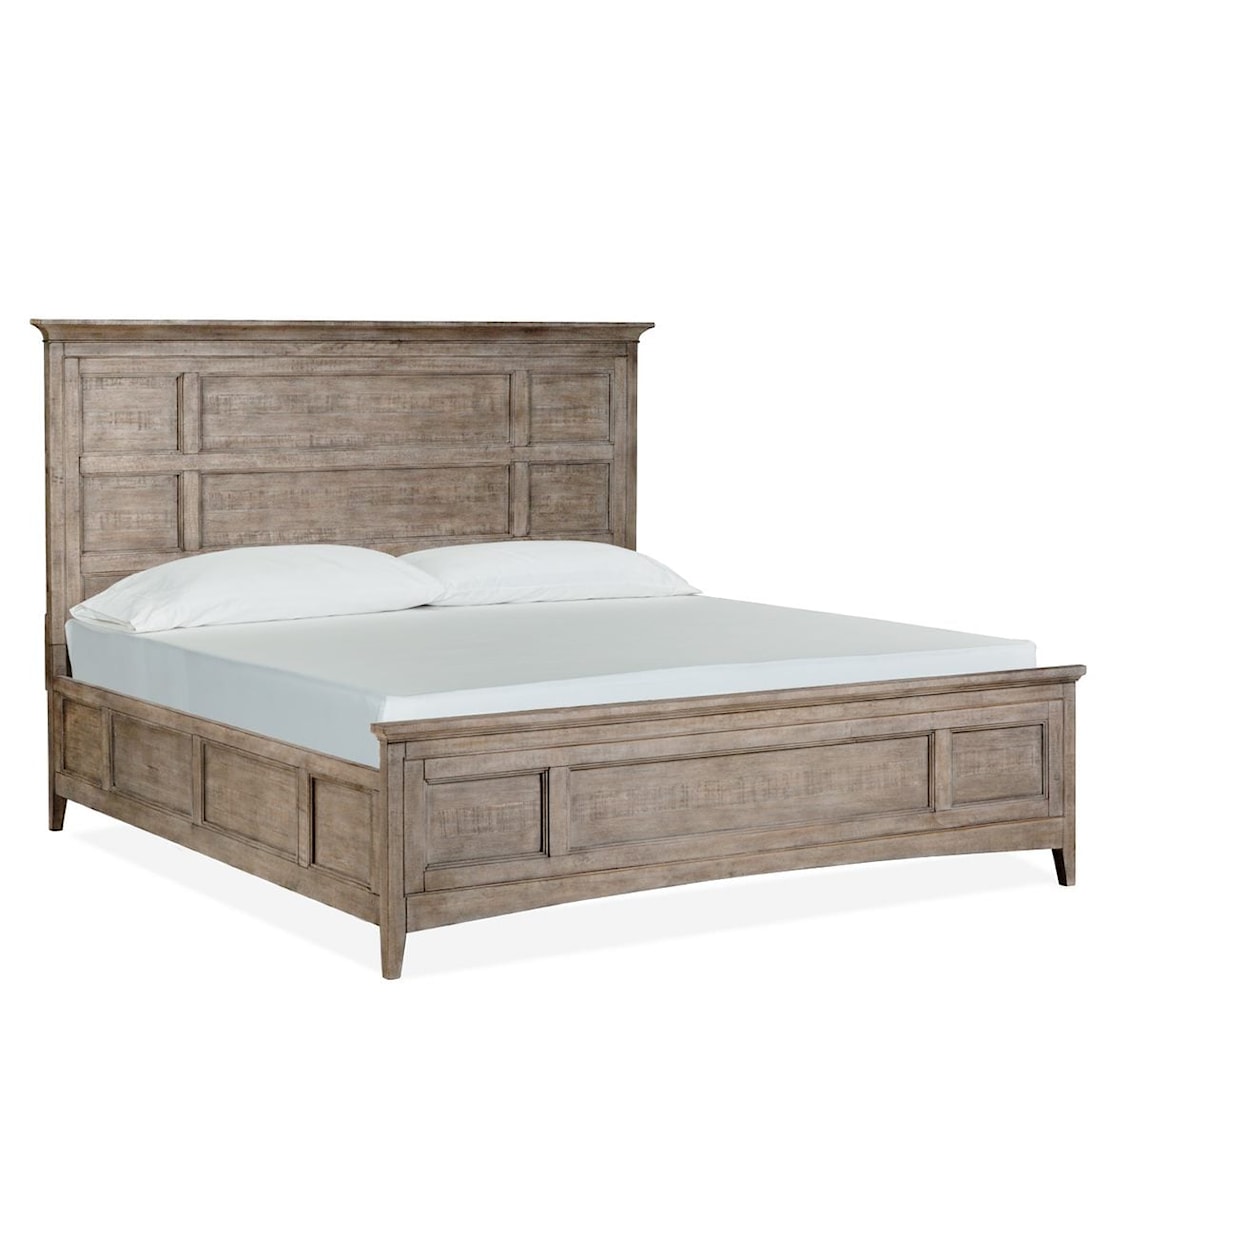 Magnussen Home Paxton Place Bedroom King Panel Bed